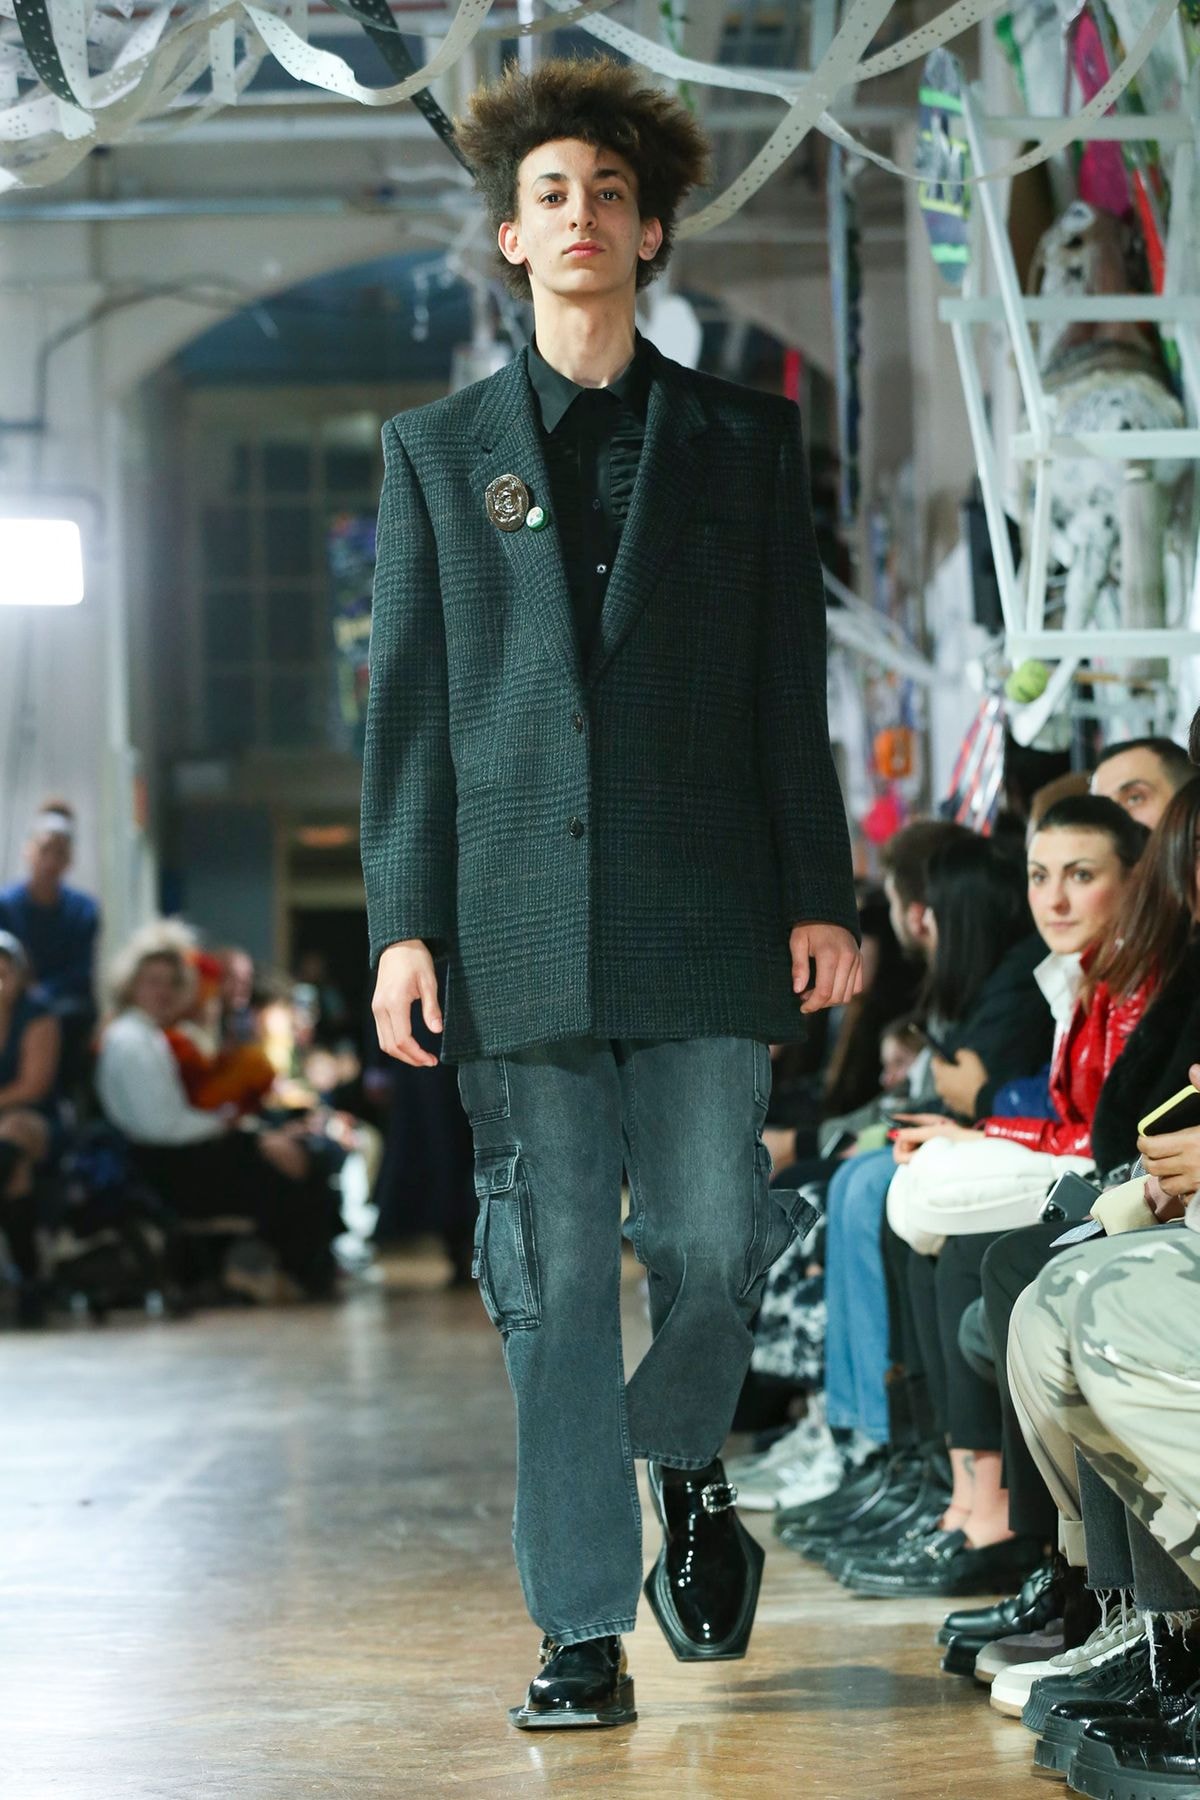 Menswear designer Martine Rose: 'Fashion used to be for outsiders